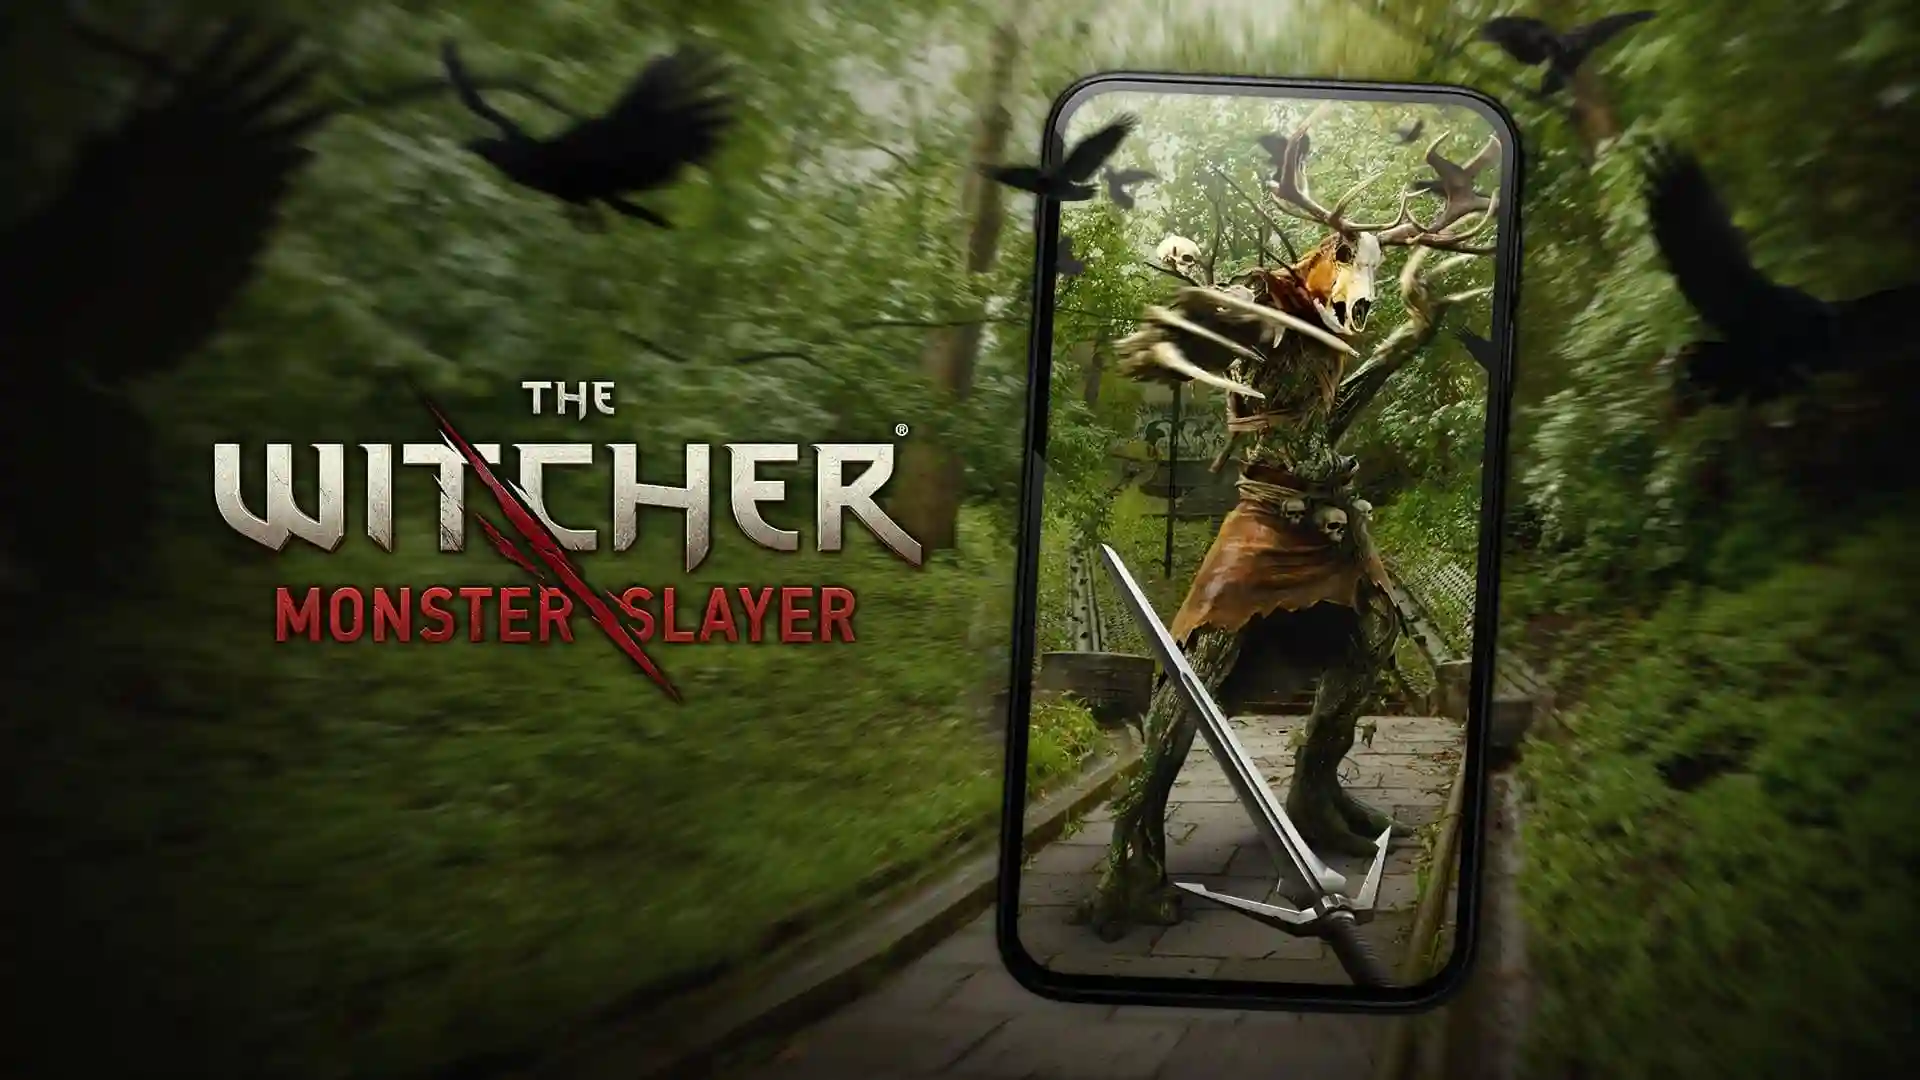 The Witcher Monster Slayer Announced For Mobile